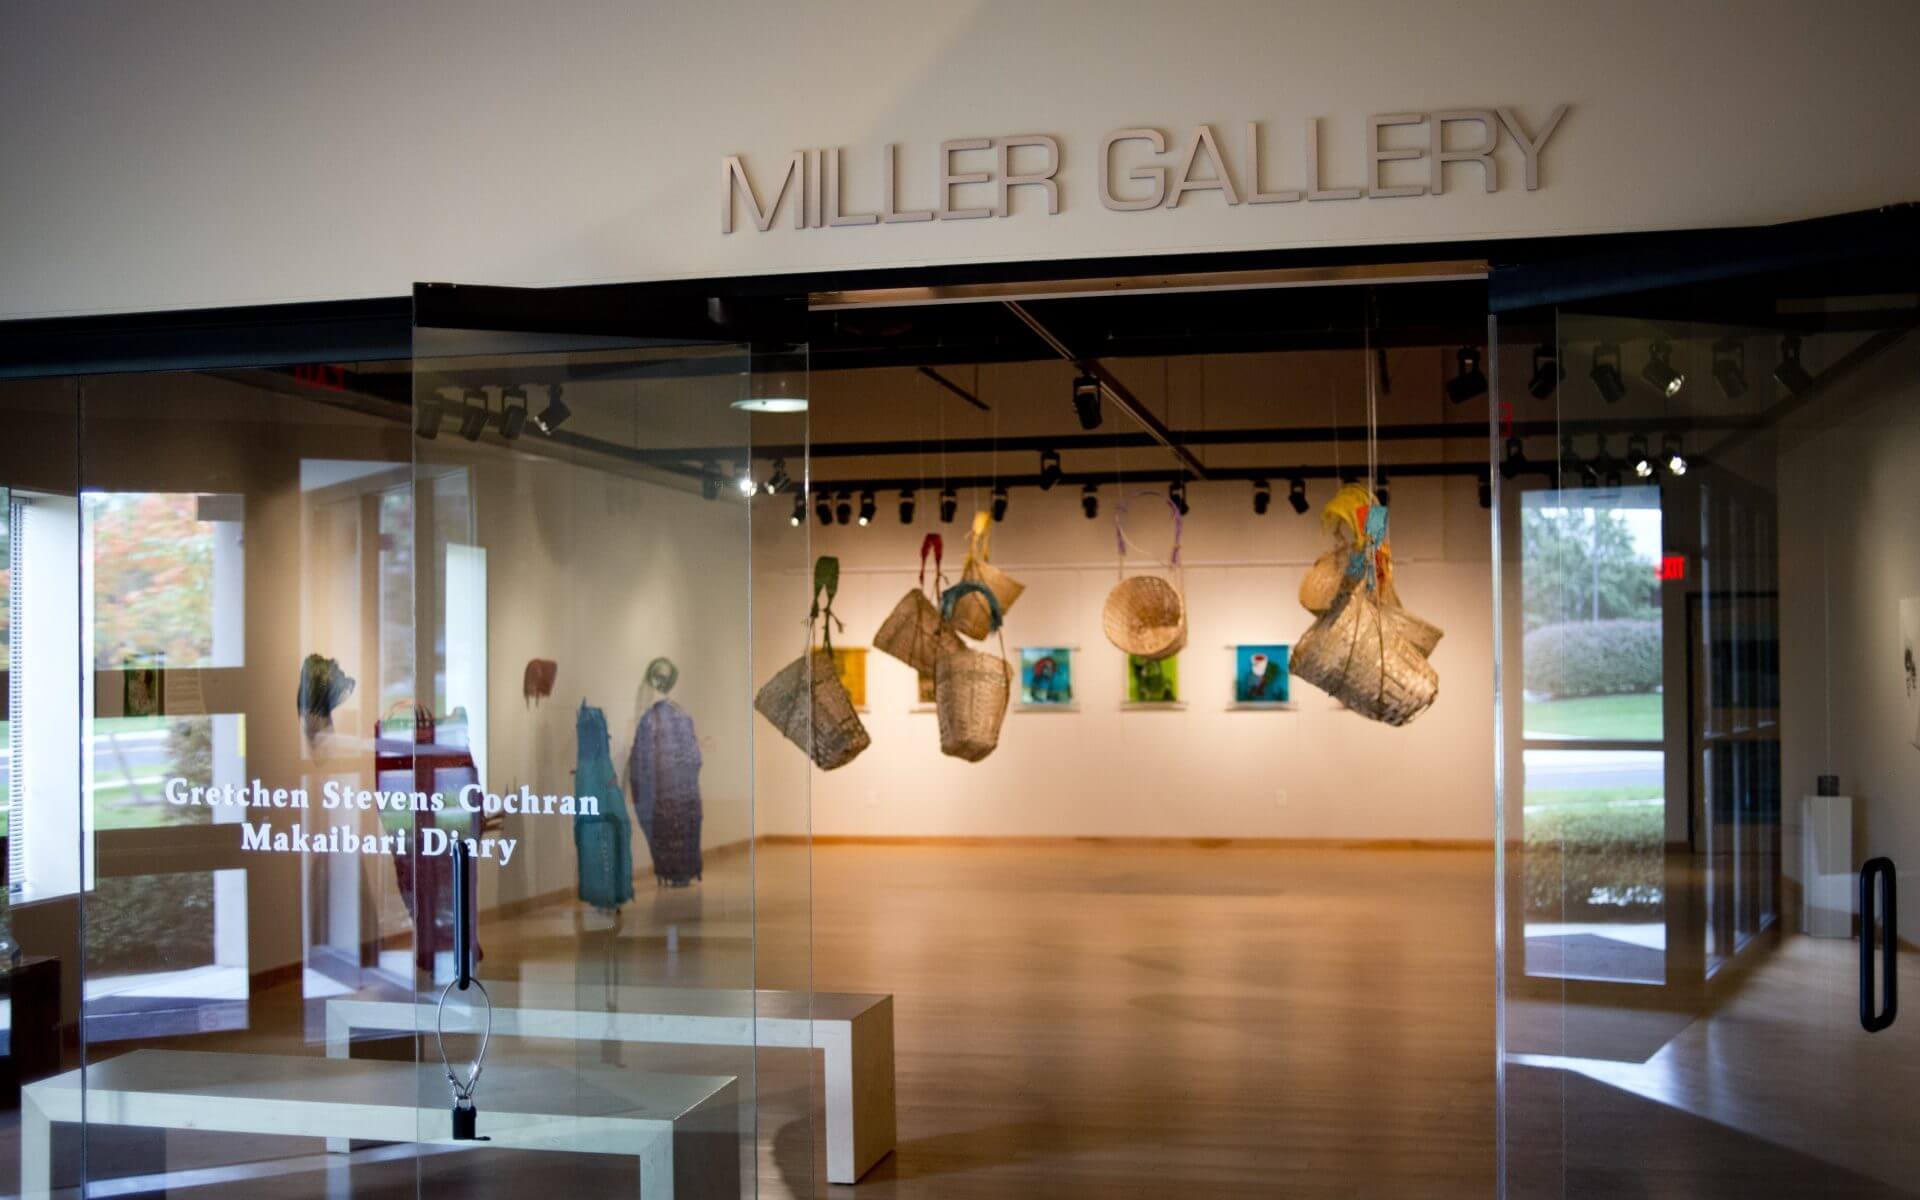 Entrance to the Miller Gallery